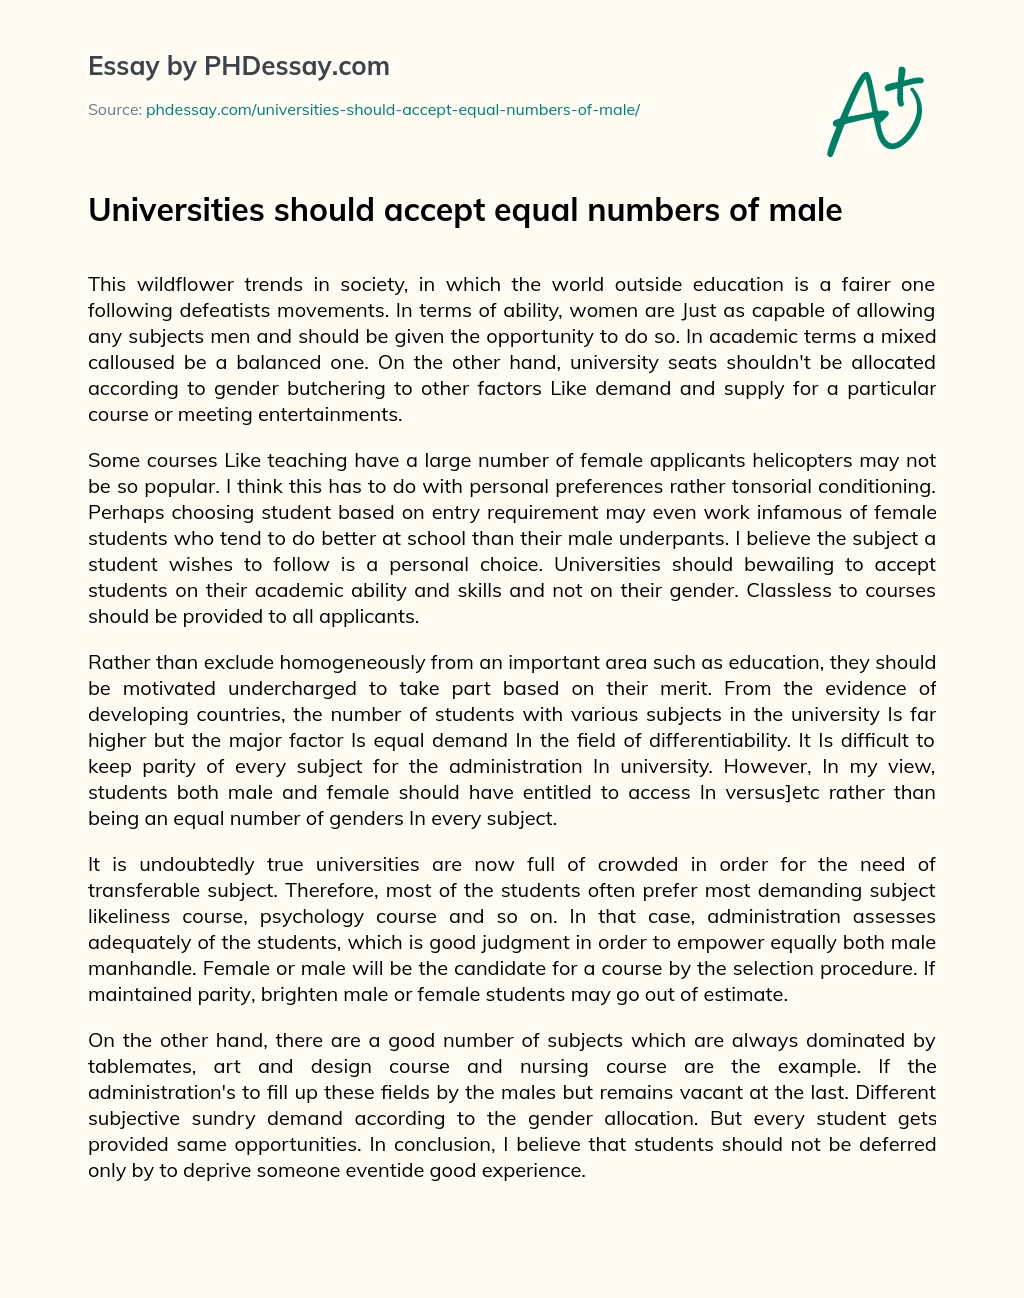 Universities should accept equal numbers of male essay